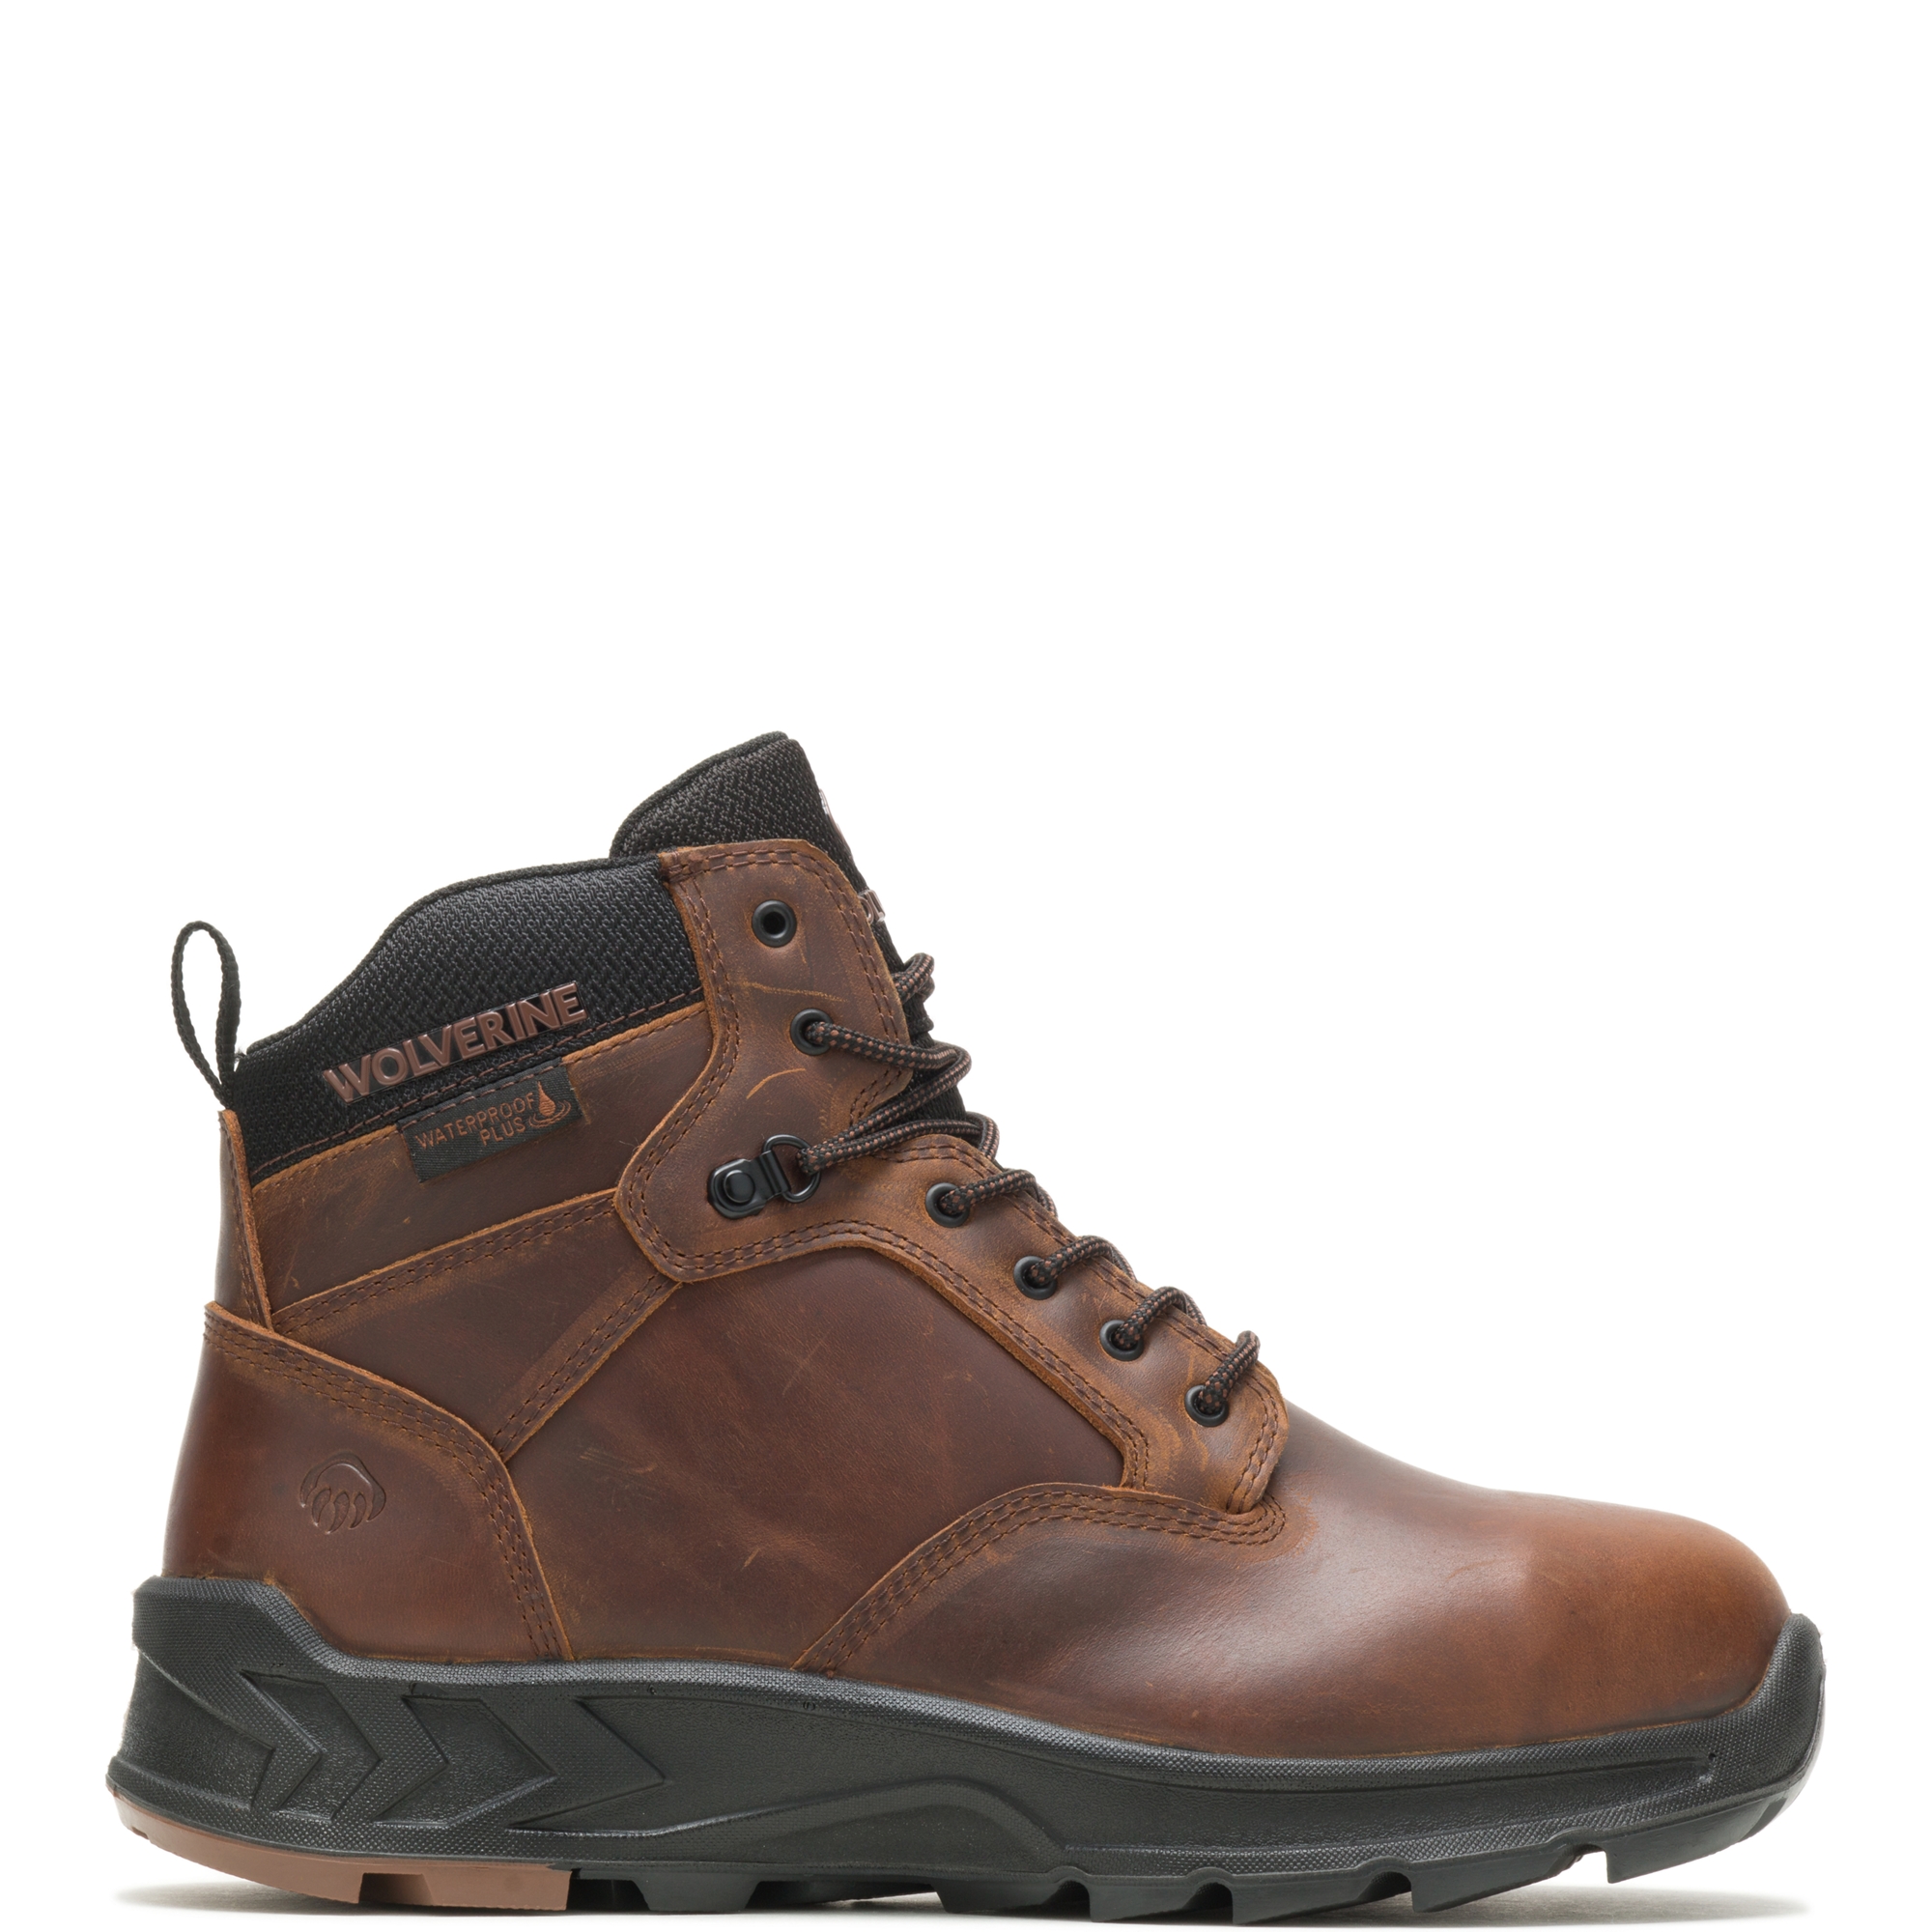 Wolverine Men ShiftPLUS Work LX 6" Alloy-Toe Boot Shoes